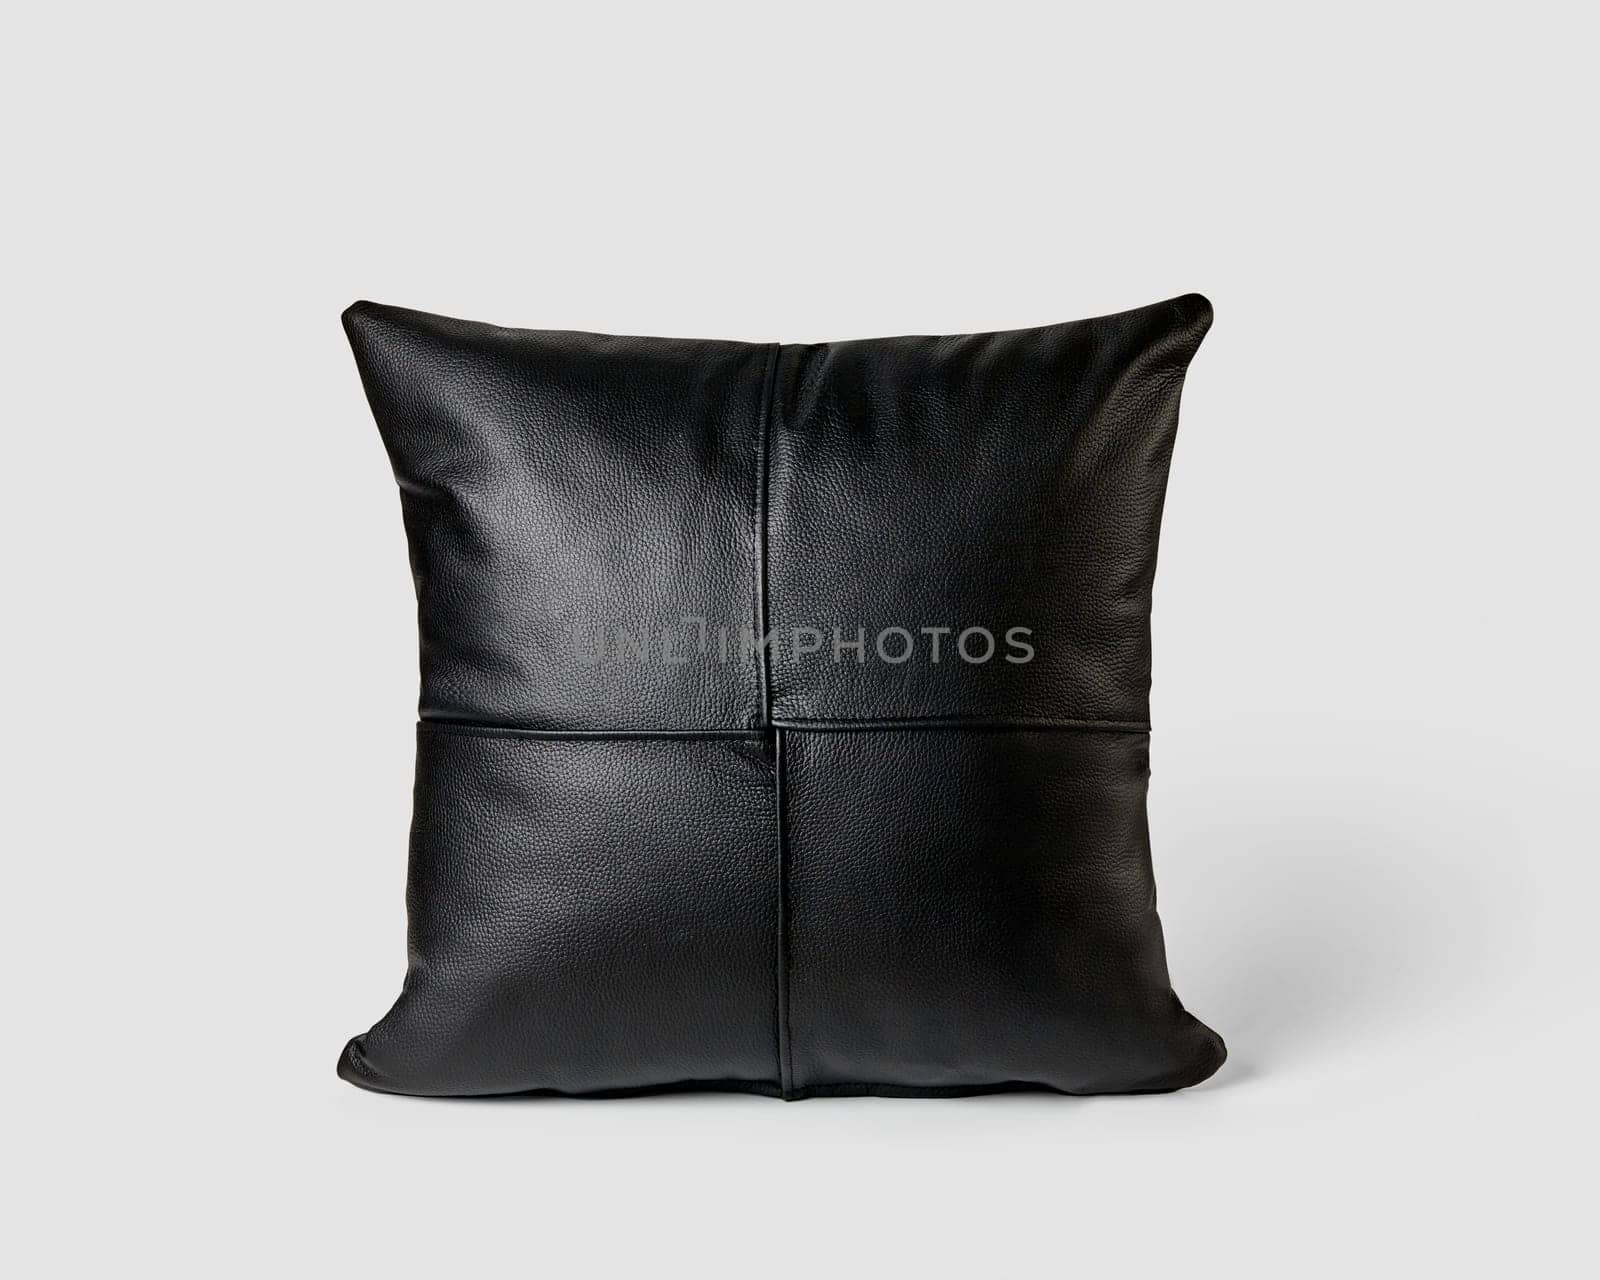 Elegant couch cushion featuring made of neatly stitched patches of smooth black leather isolated on white background. Handcrafted interior design item